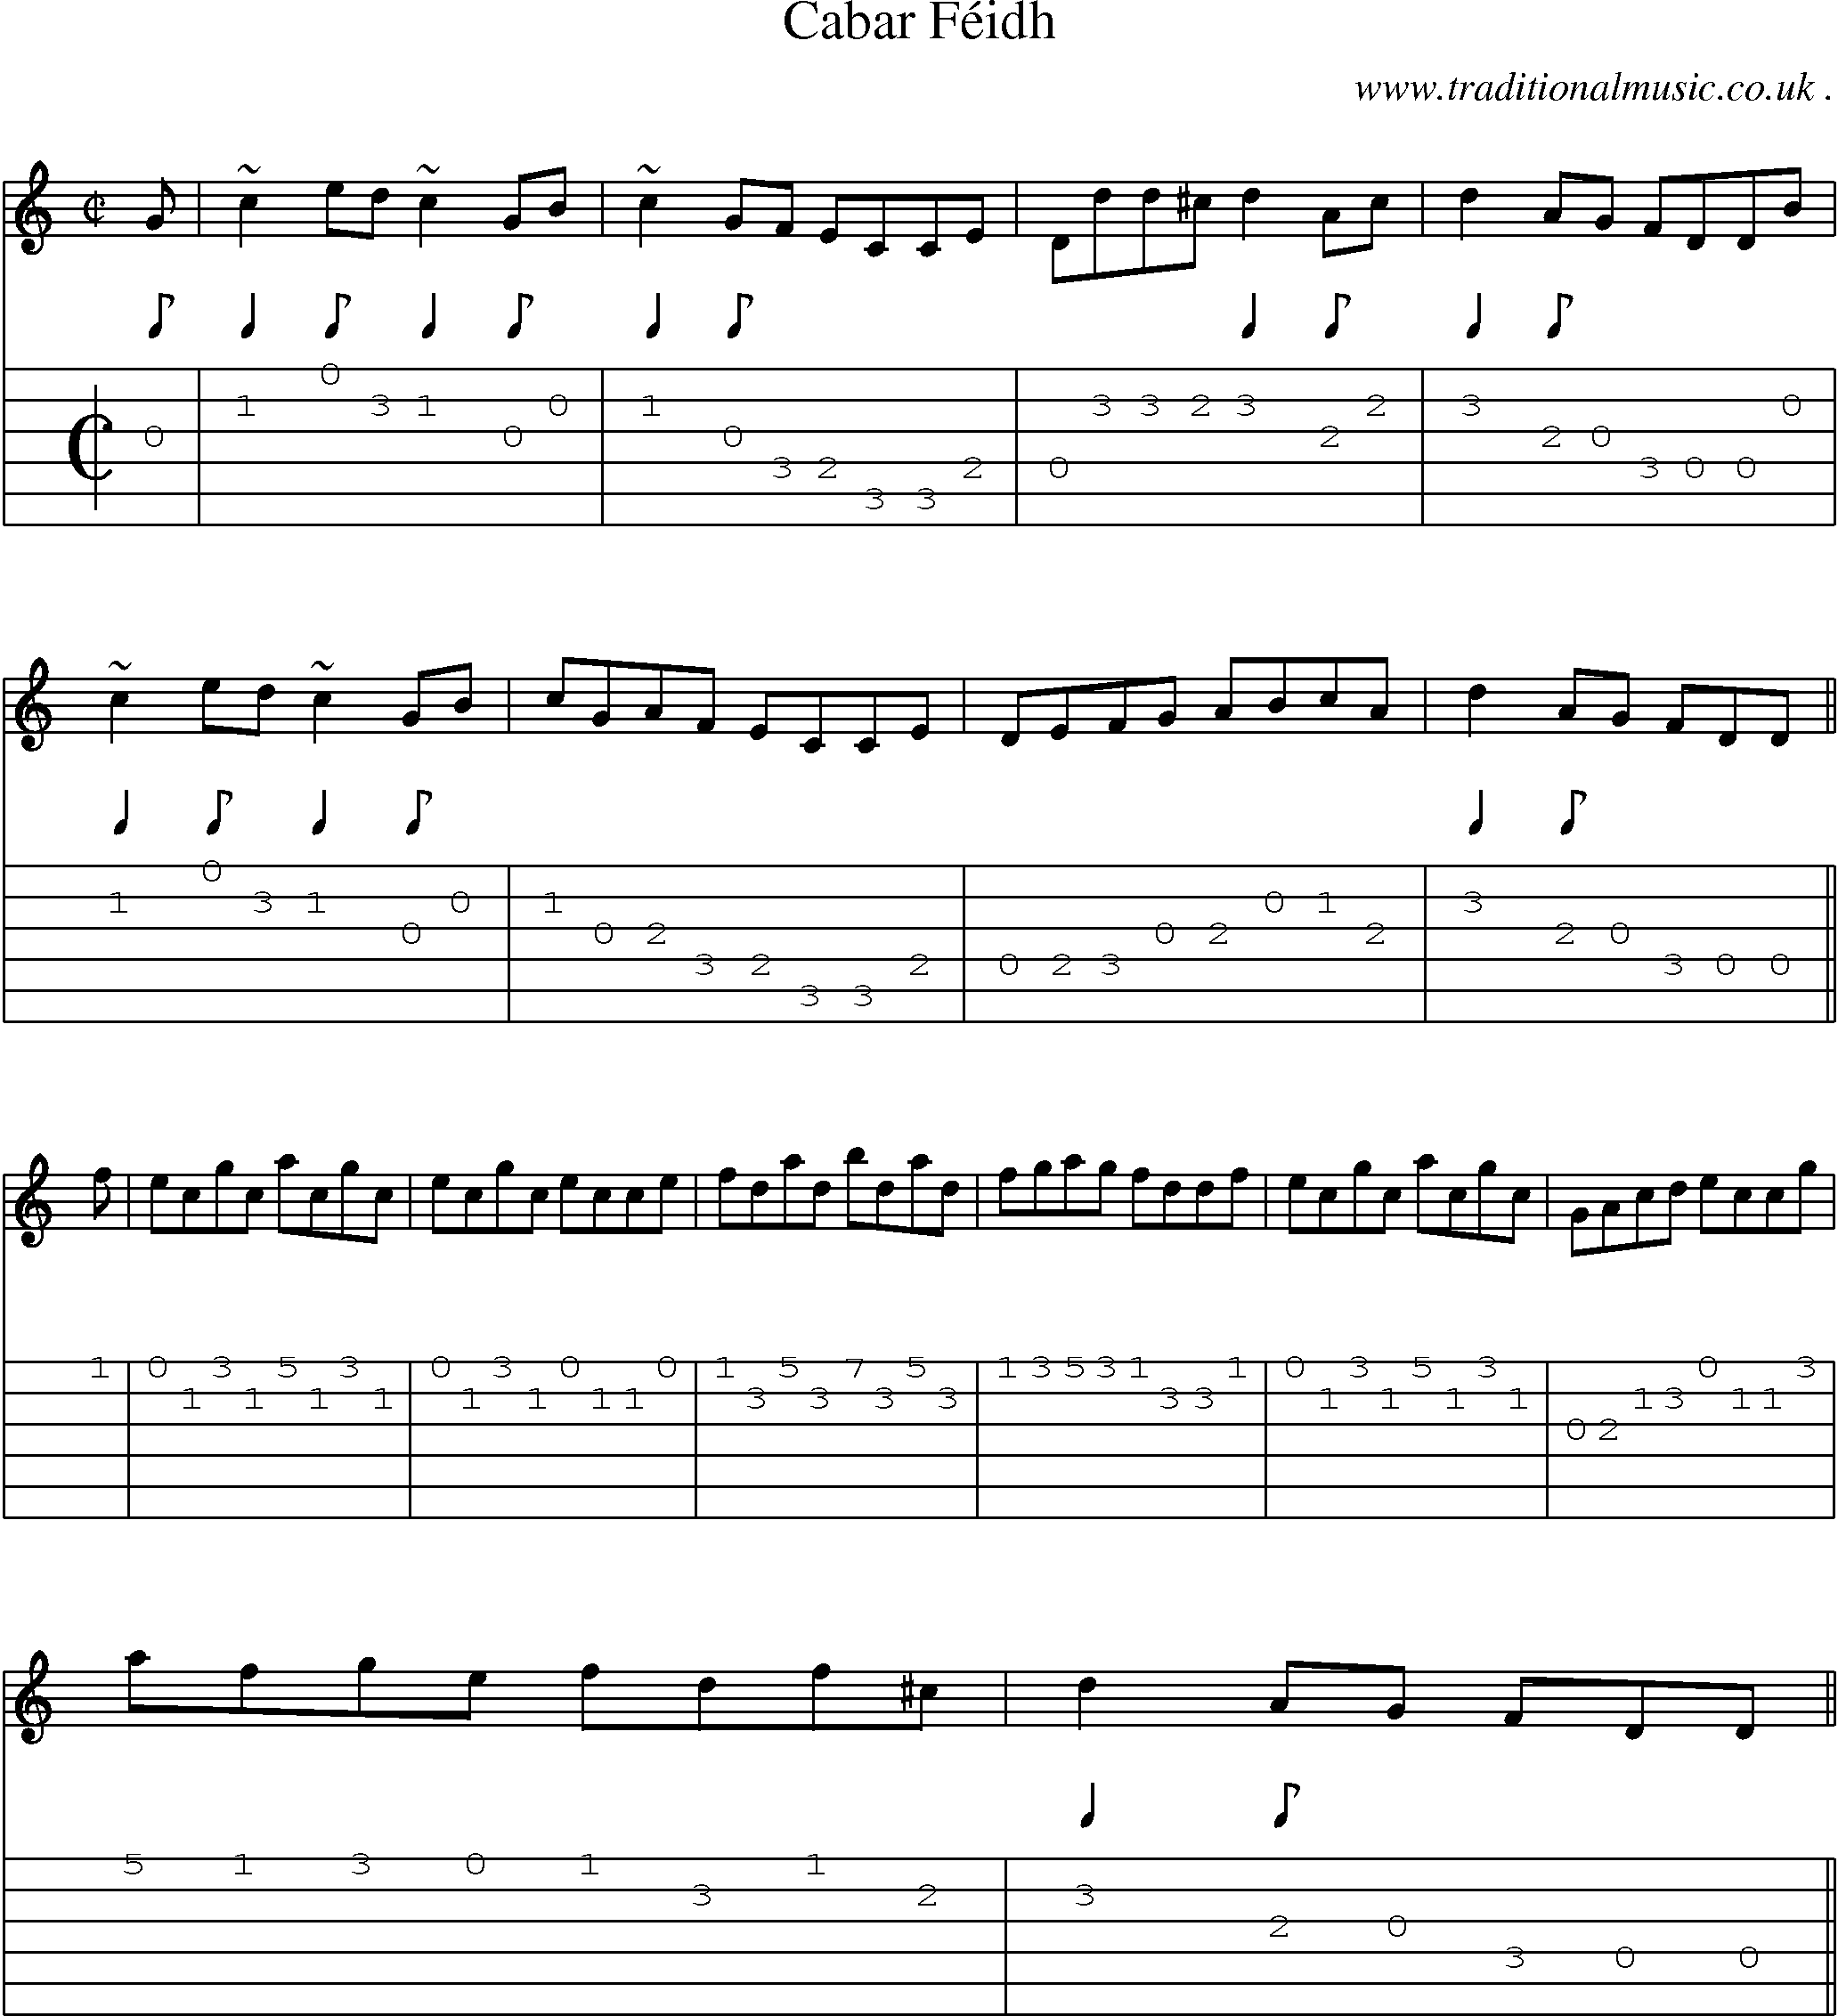 Sheet-music  score, Chords and Guitar Tabs for Cabar Feidh1